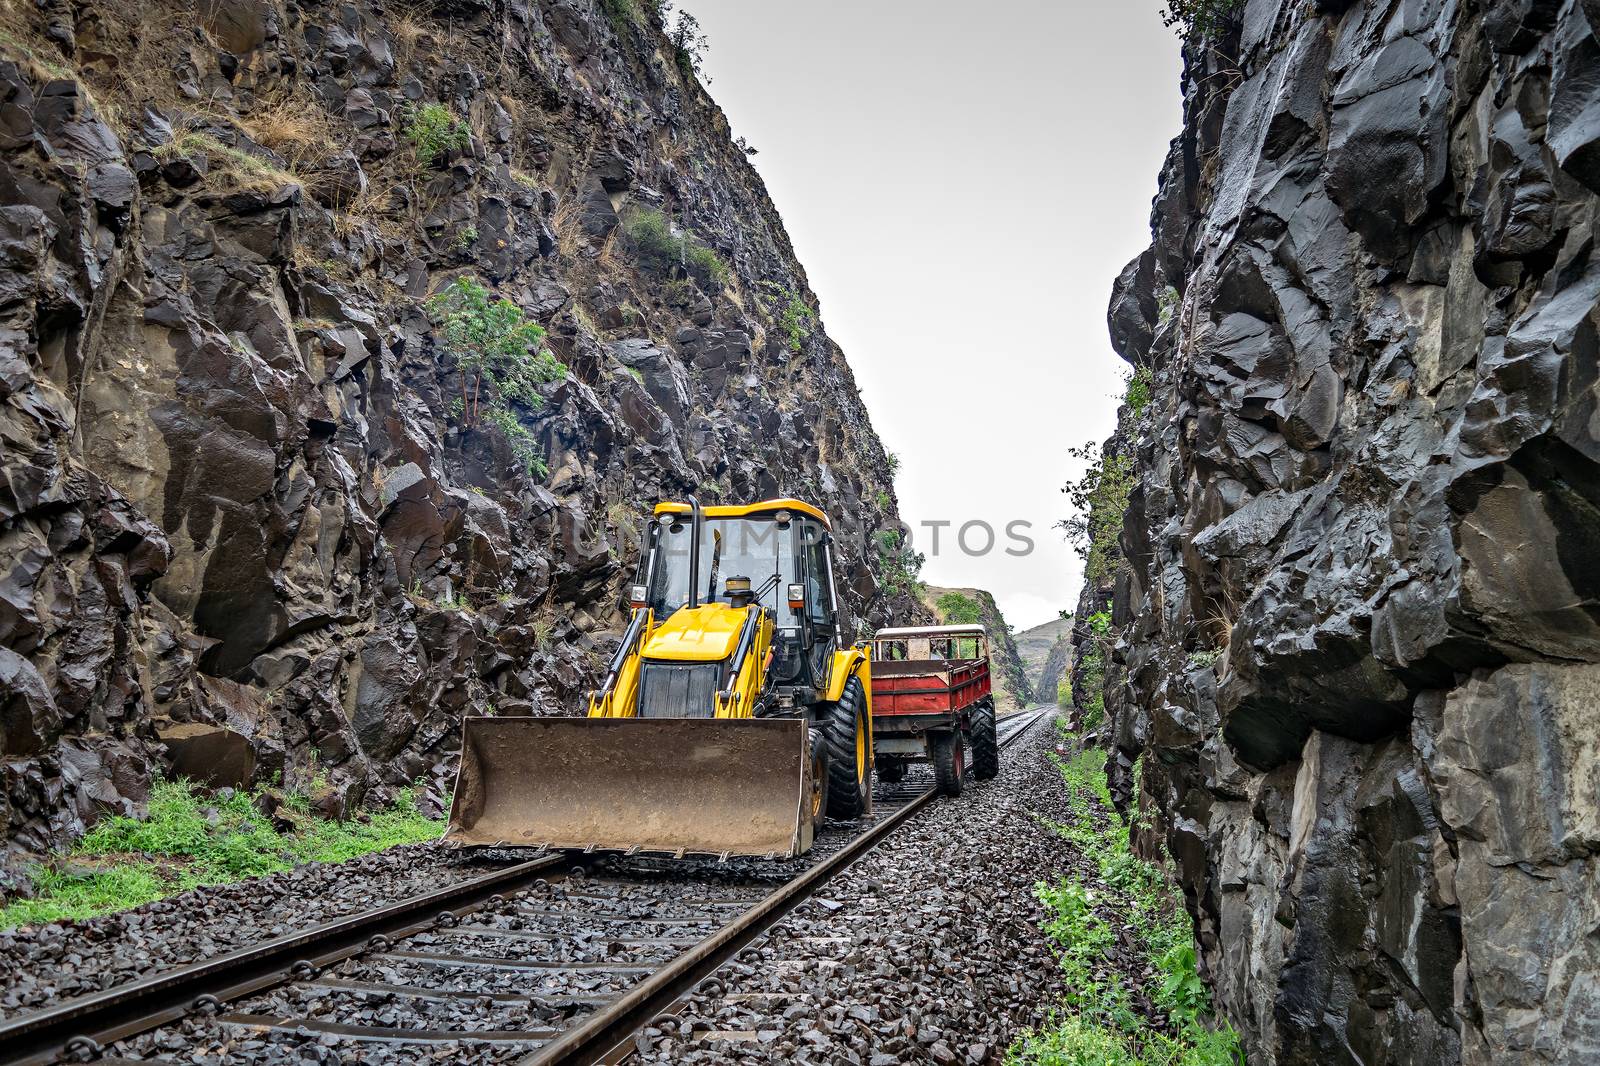 Equipment for removing vulnerable rocks on the side of railway track as pre-monsoon work in Indian Railways. It helps in reducing falling boulders for safe passage of trains.